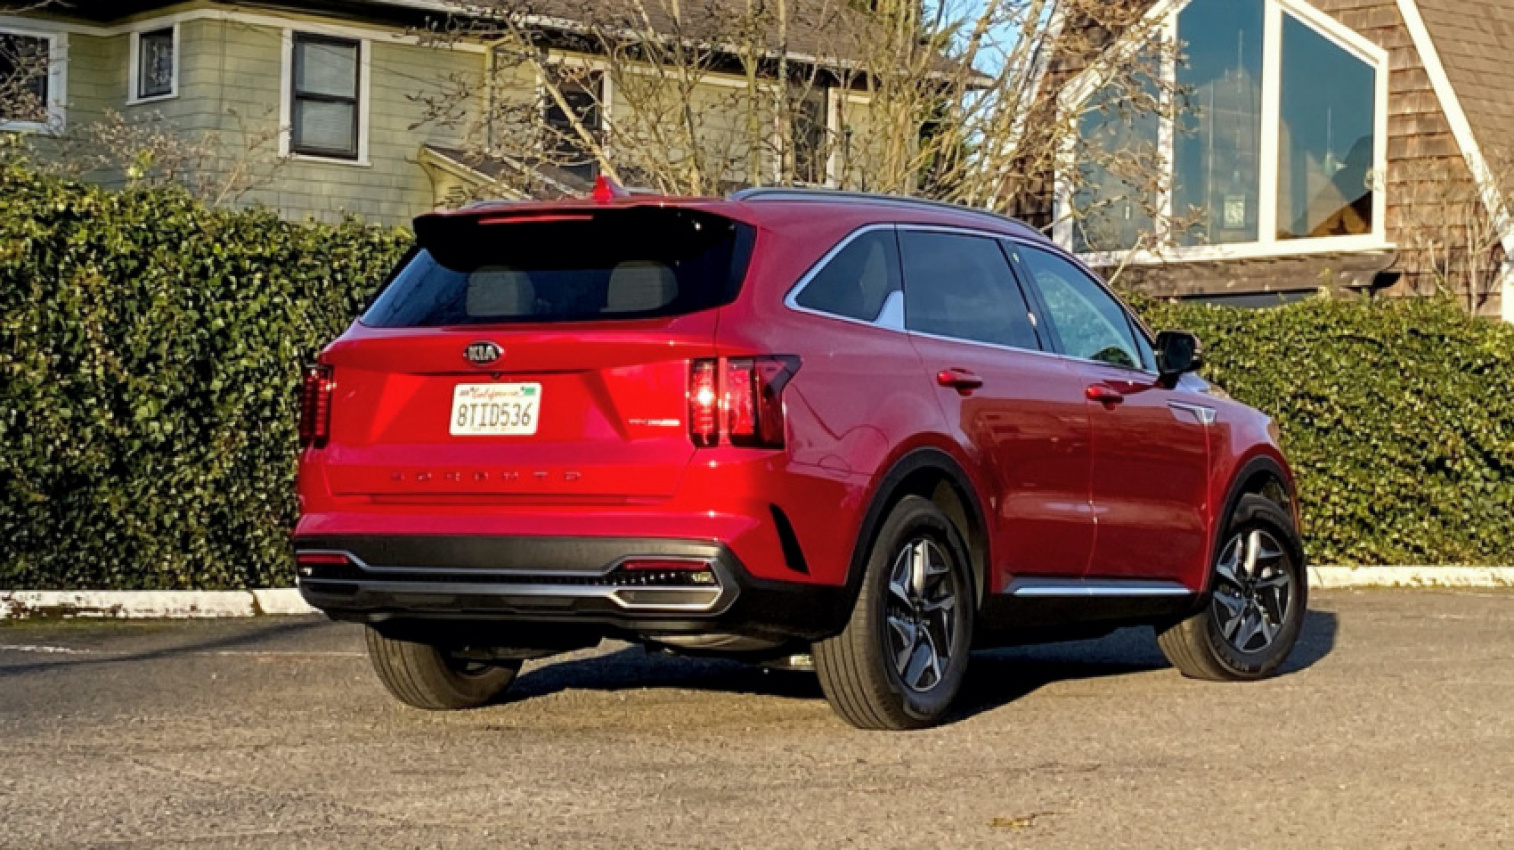 autos, cars, kia, first drives, hybrids, kia news, kia sorento, kia sorento news, first drive review: 2021 kia sorento hybrid beats highlander hybrid with 37 mpg and better tech, but it’s no telluride